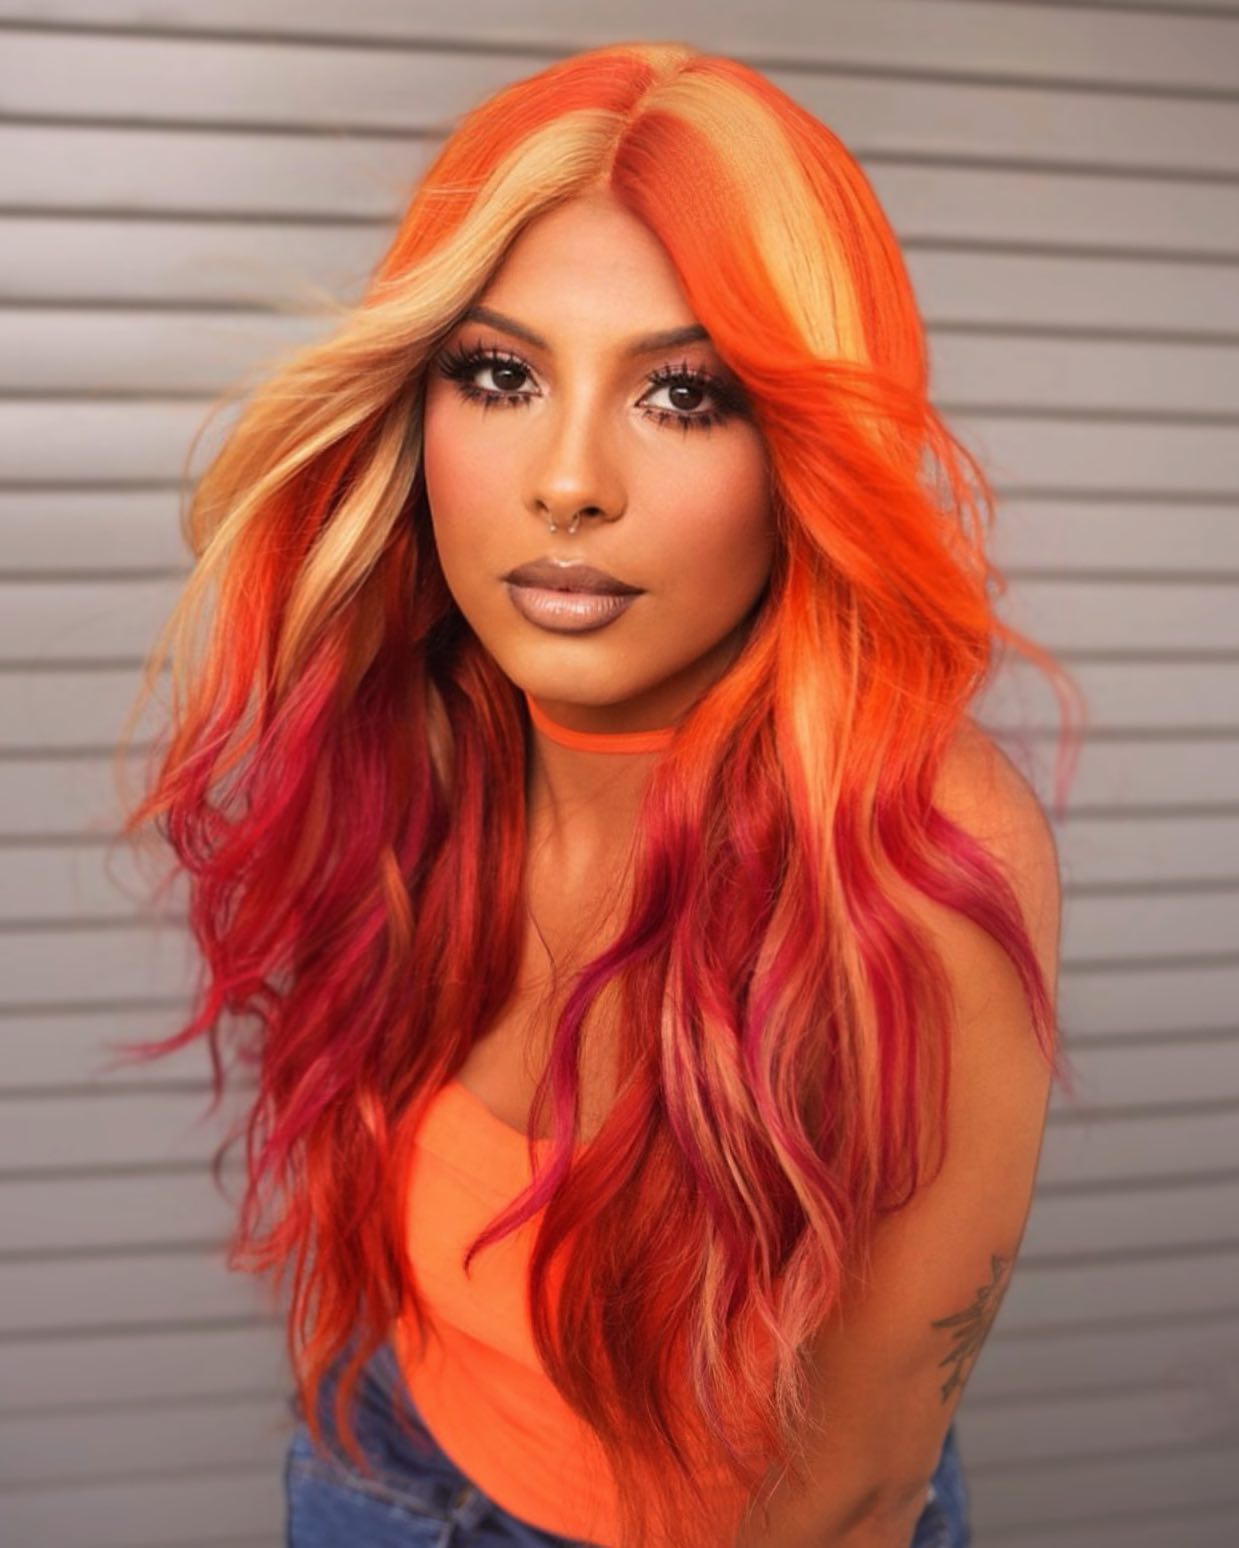 100+ Best Colorful Hair Ideas images 42